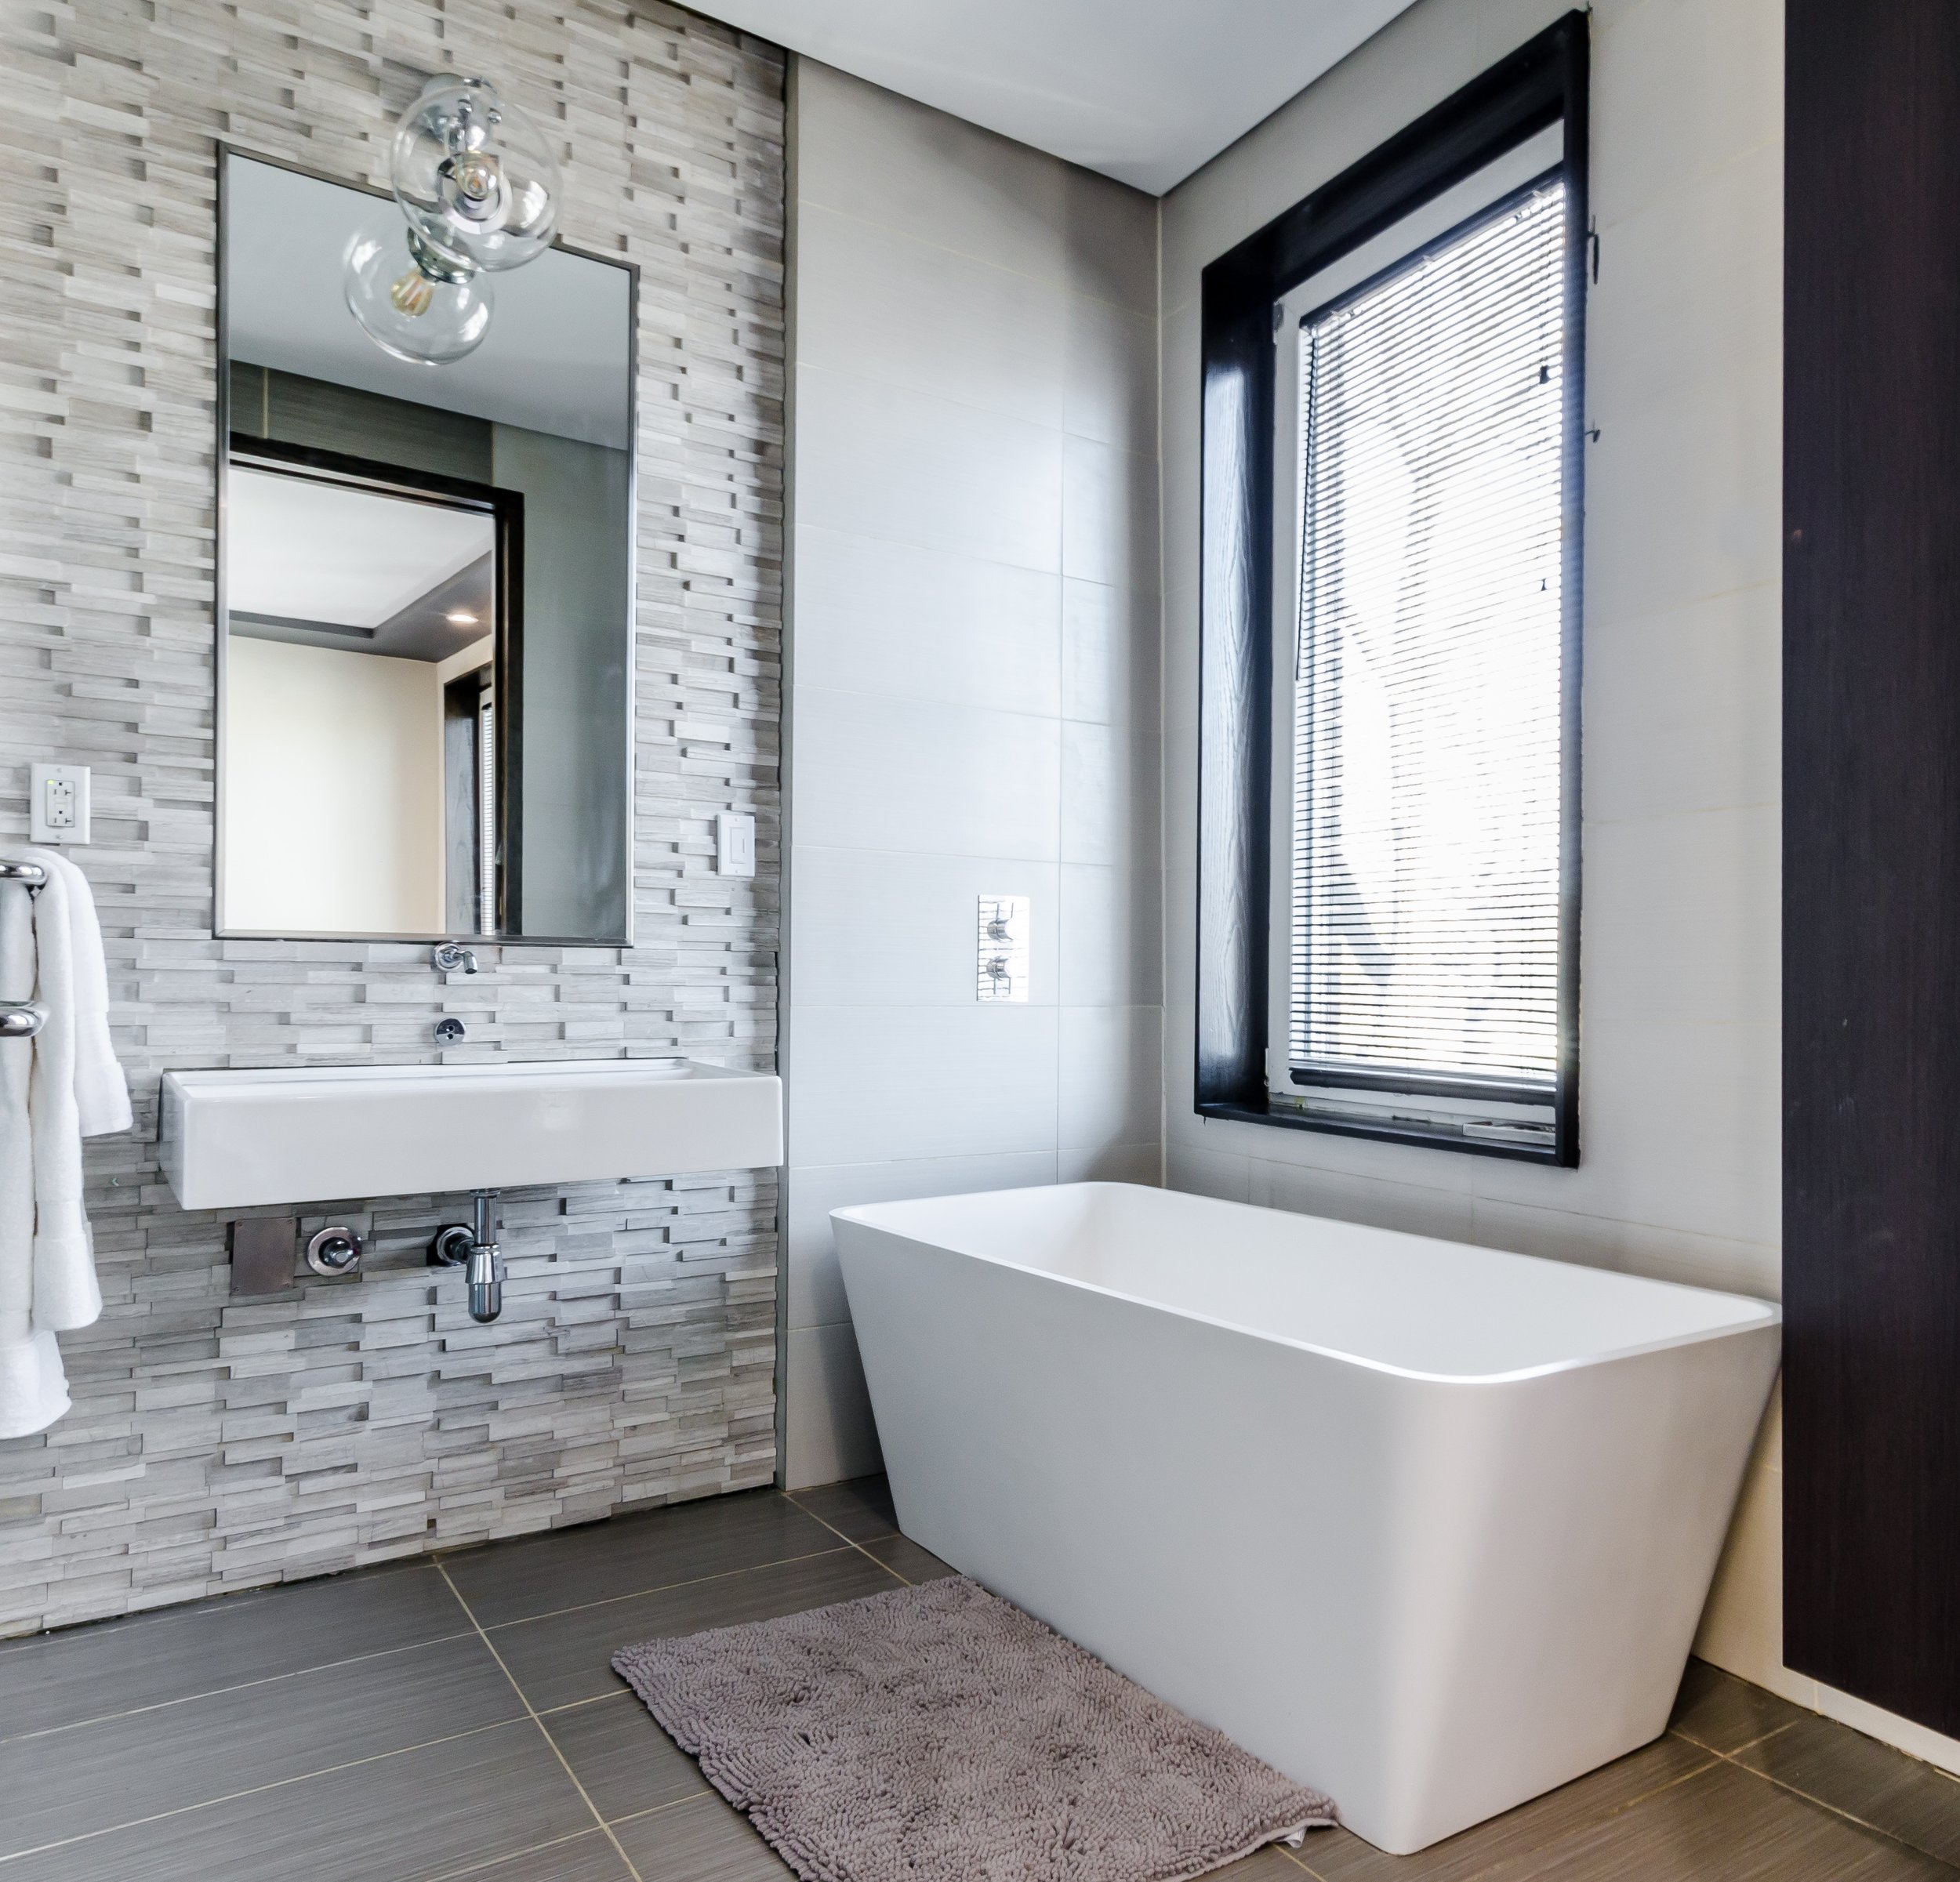  White freestanding square bathtub underneath window. Square wall mounted sink on grey stone tile.  